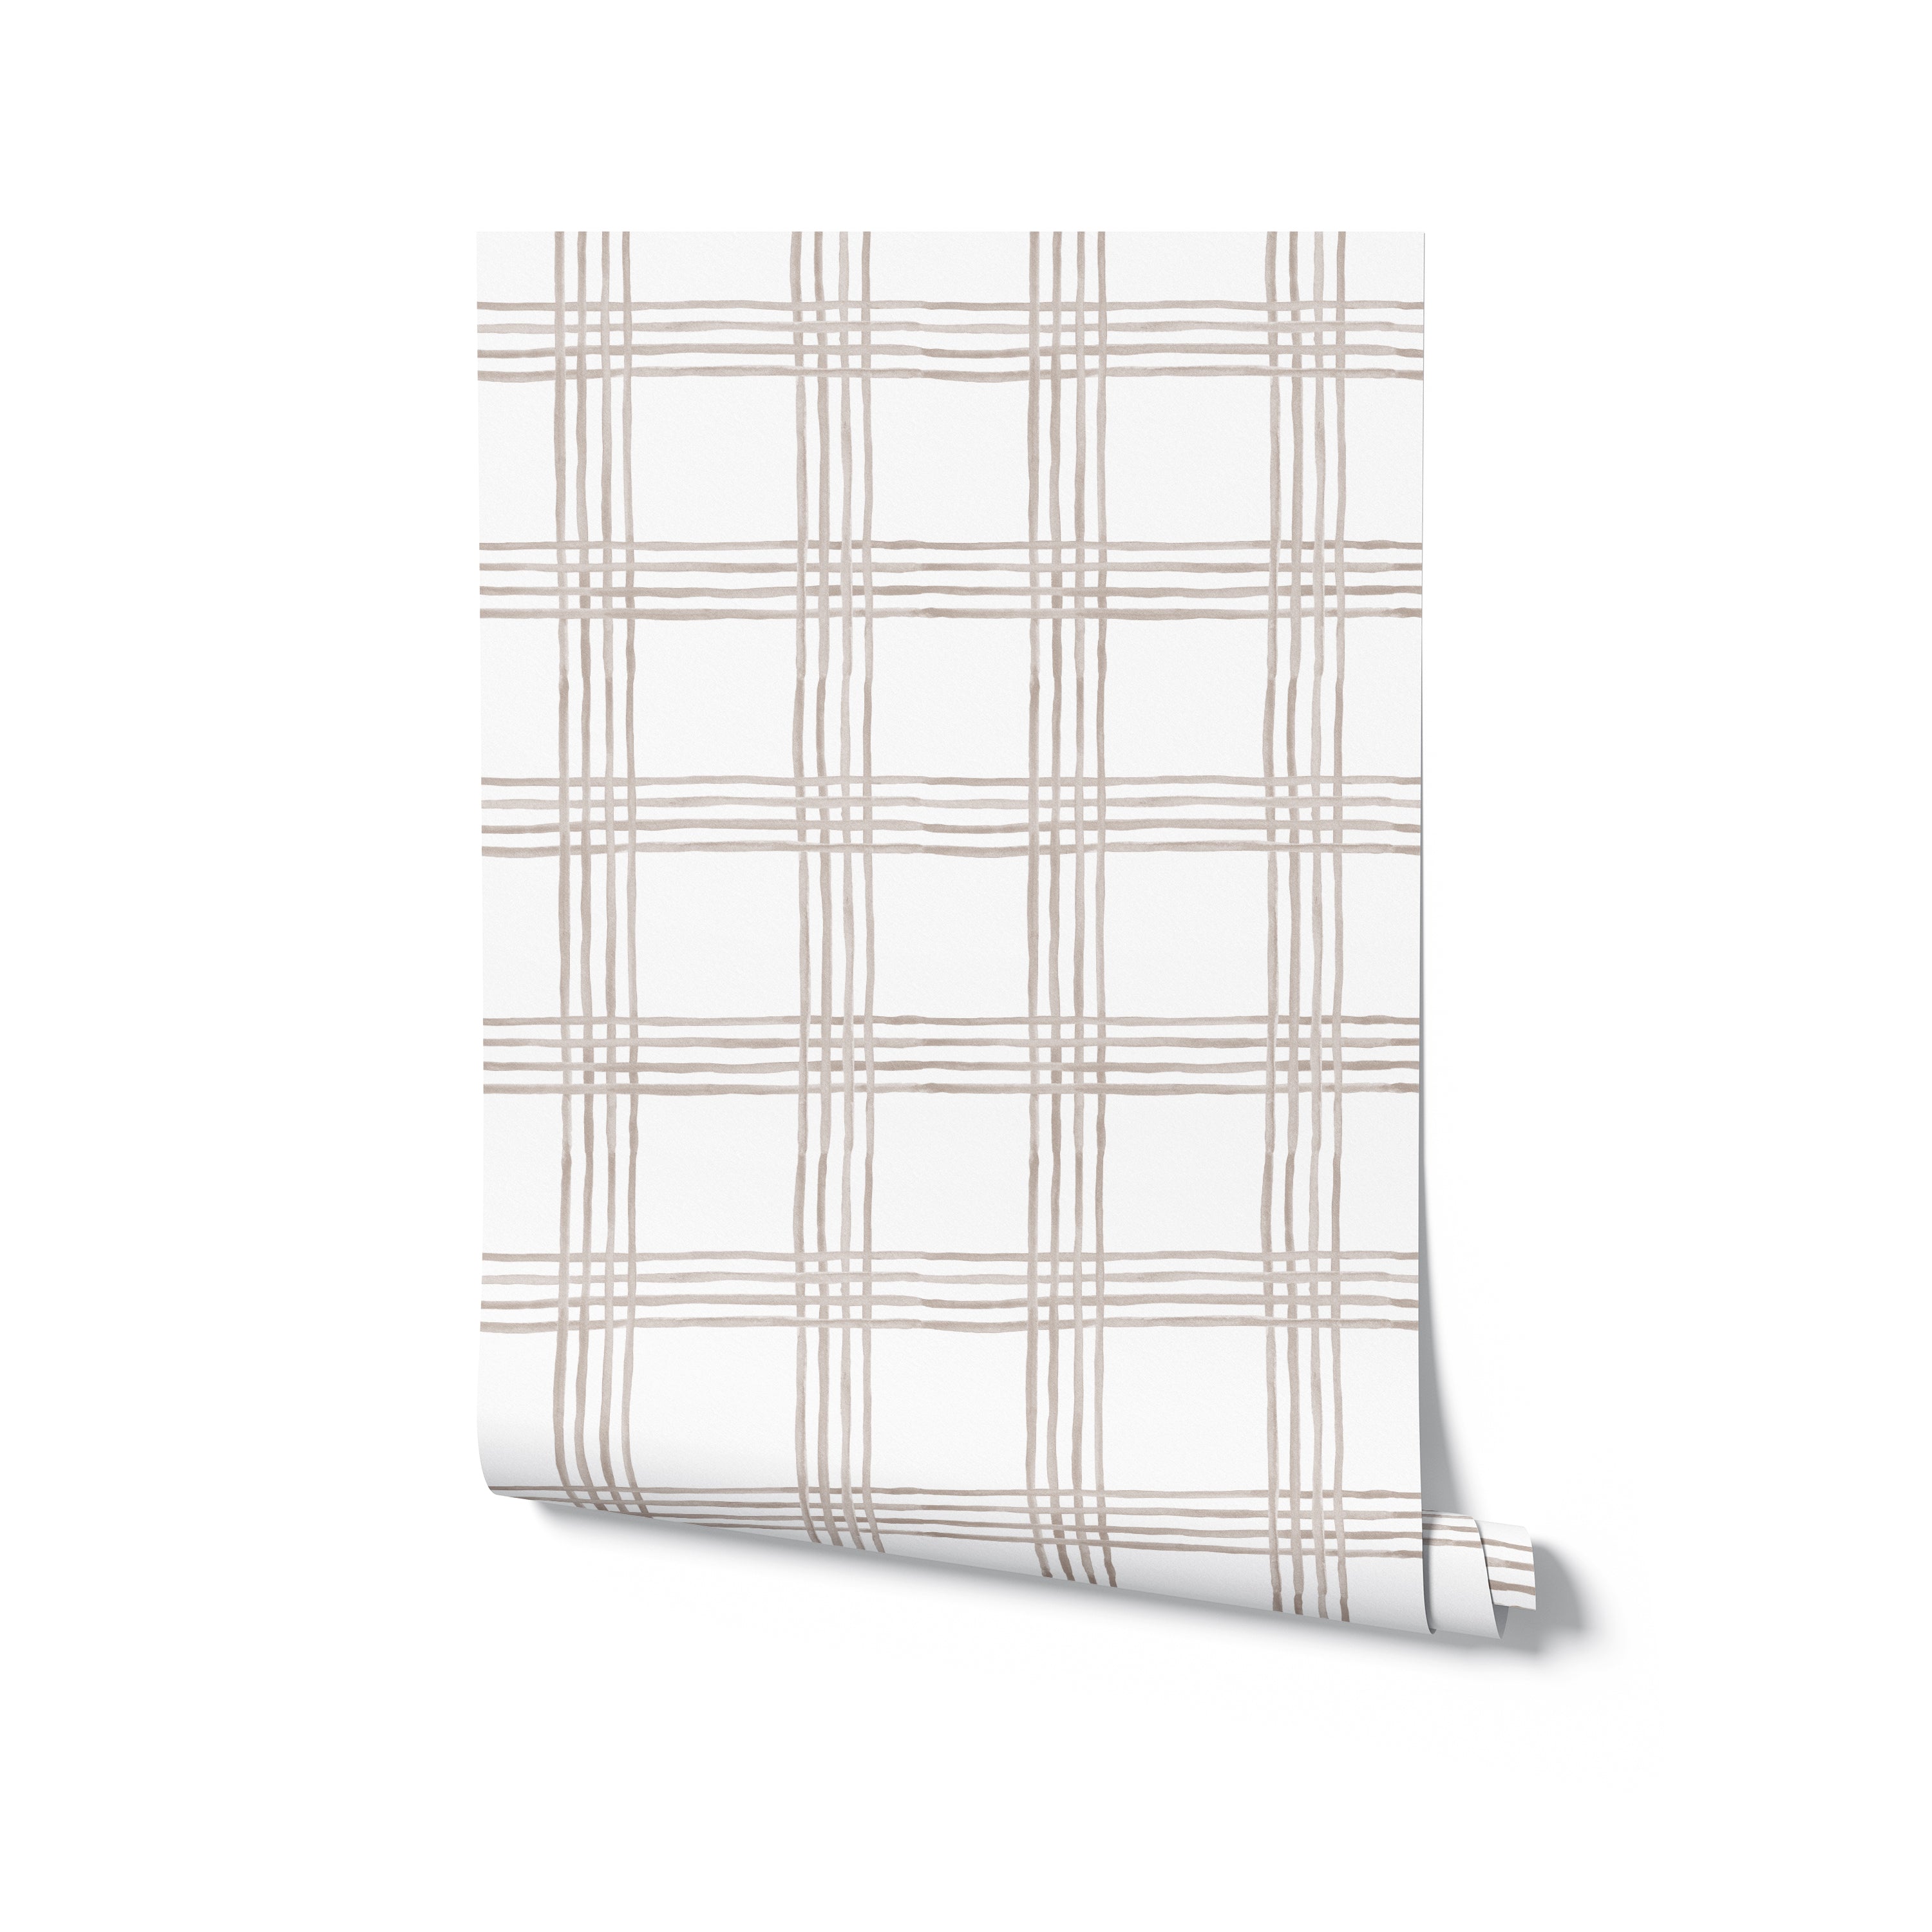 A rolled piece of Big Boho Wallpaper - 123 showcasing the geometric grid pattern in beige on a crisp white background. This image highlights the wallpaper’s versatility and contemporary design, ready for enhancing any interior space.